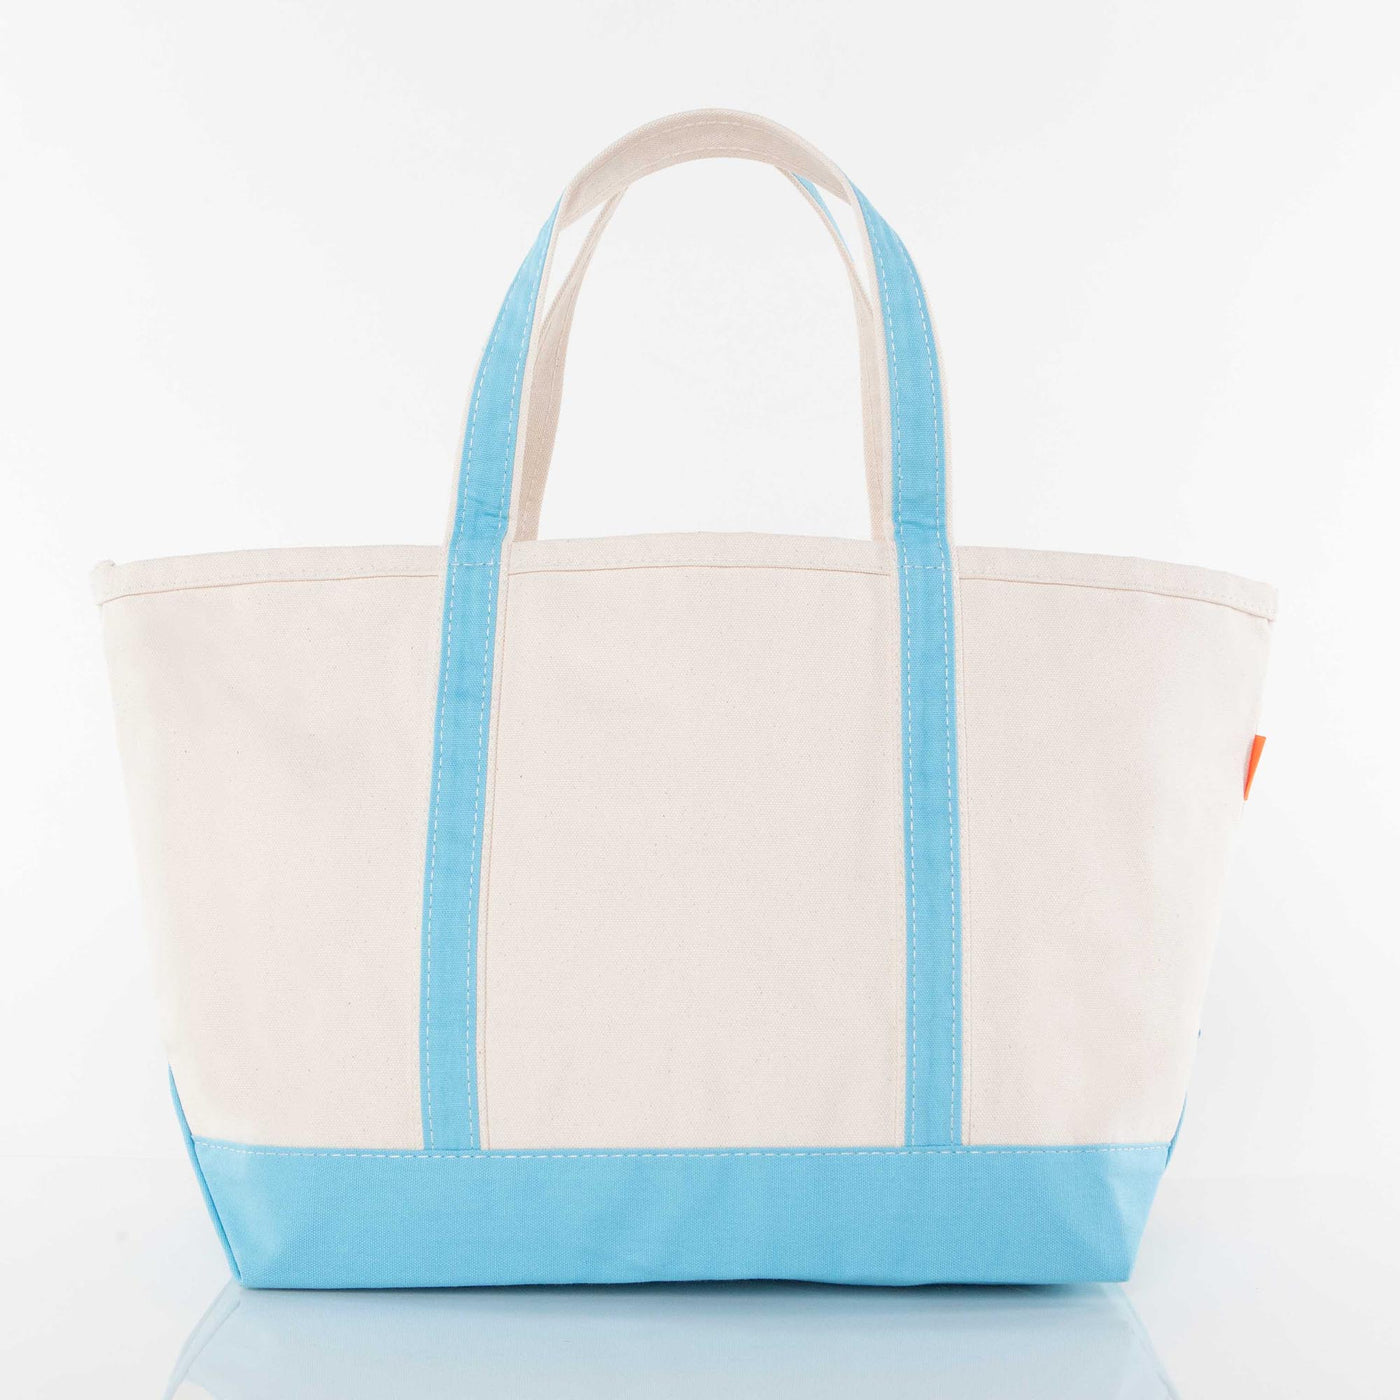 Large Classic Tote Baby Blue